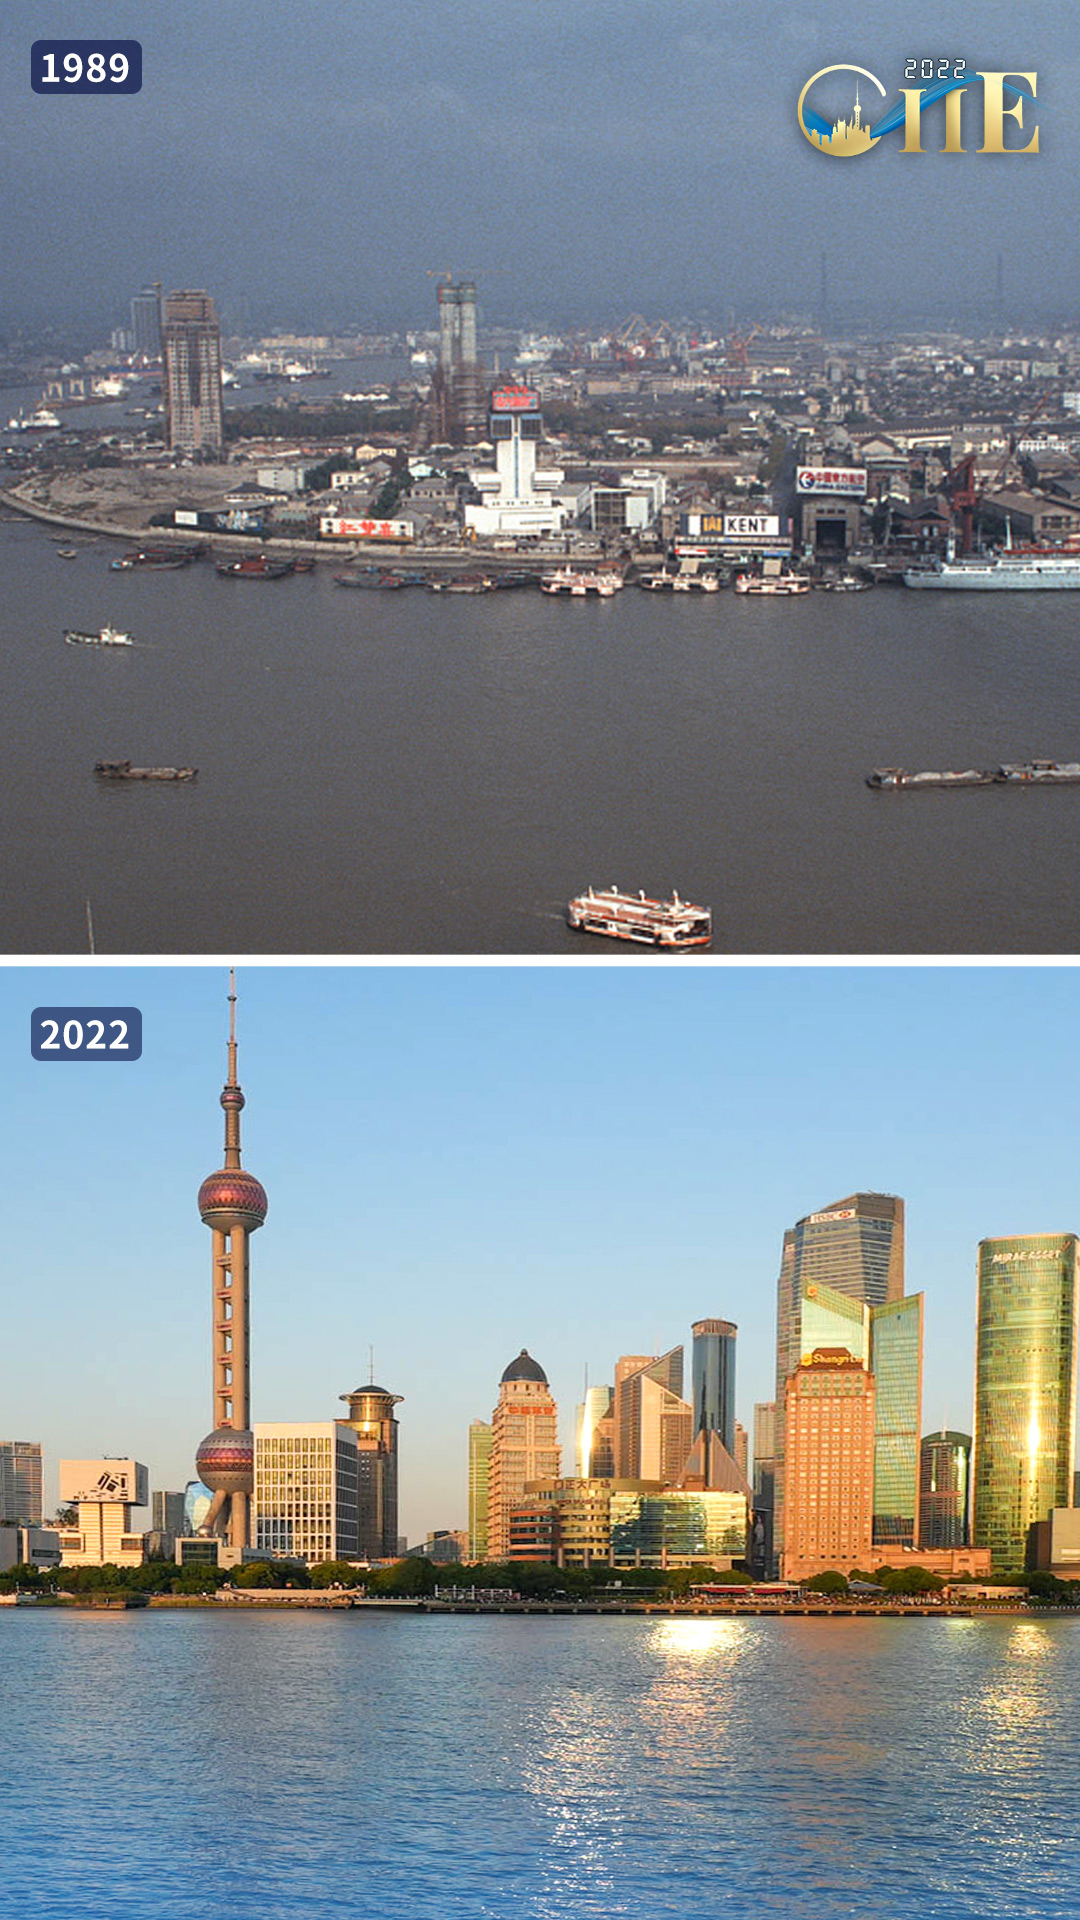 CIIE in Pictures: Old and present-day photos of Shanghai